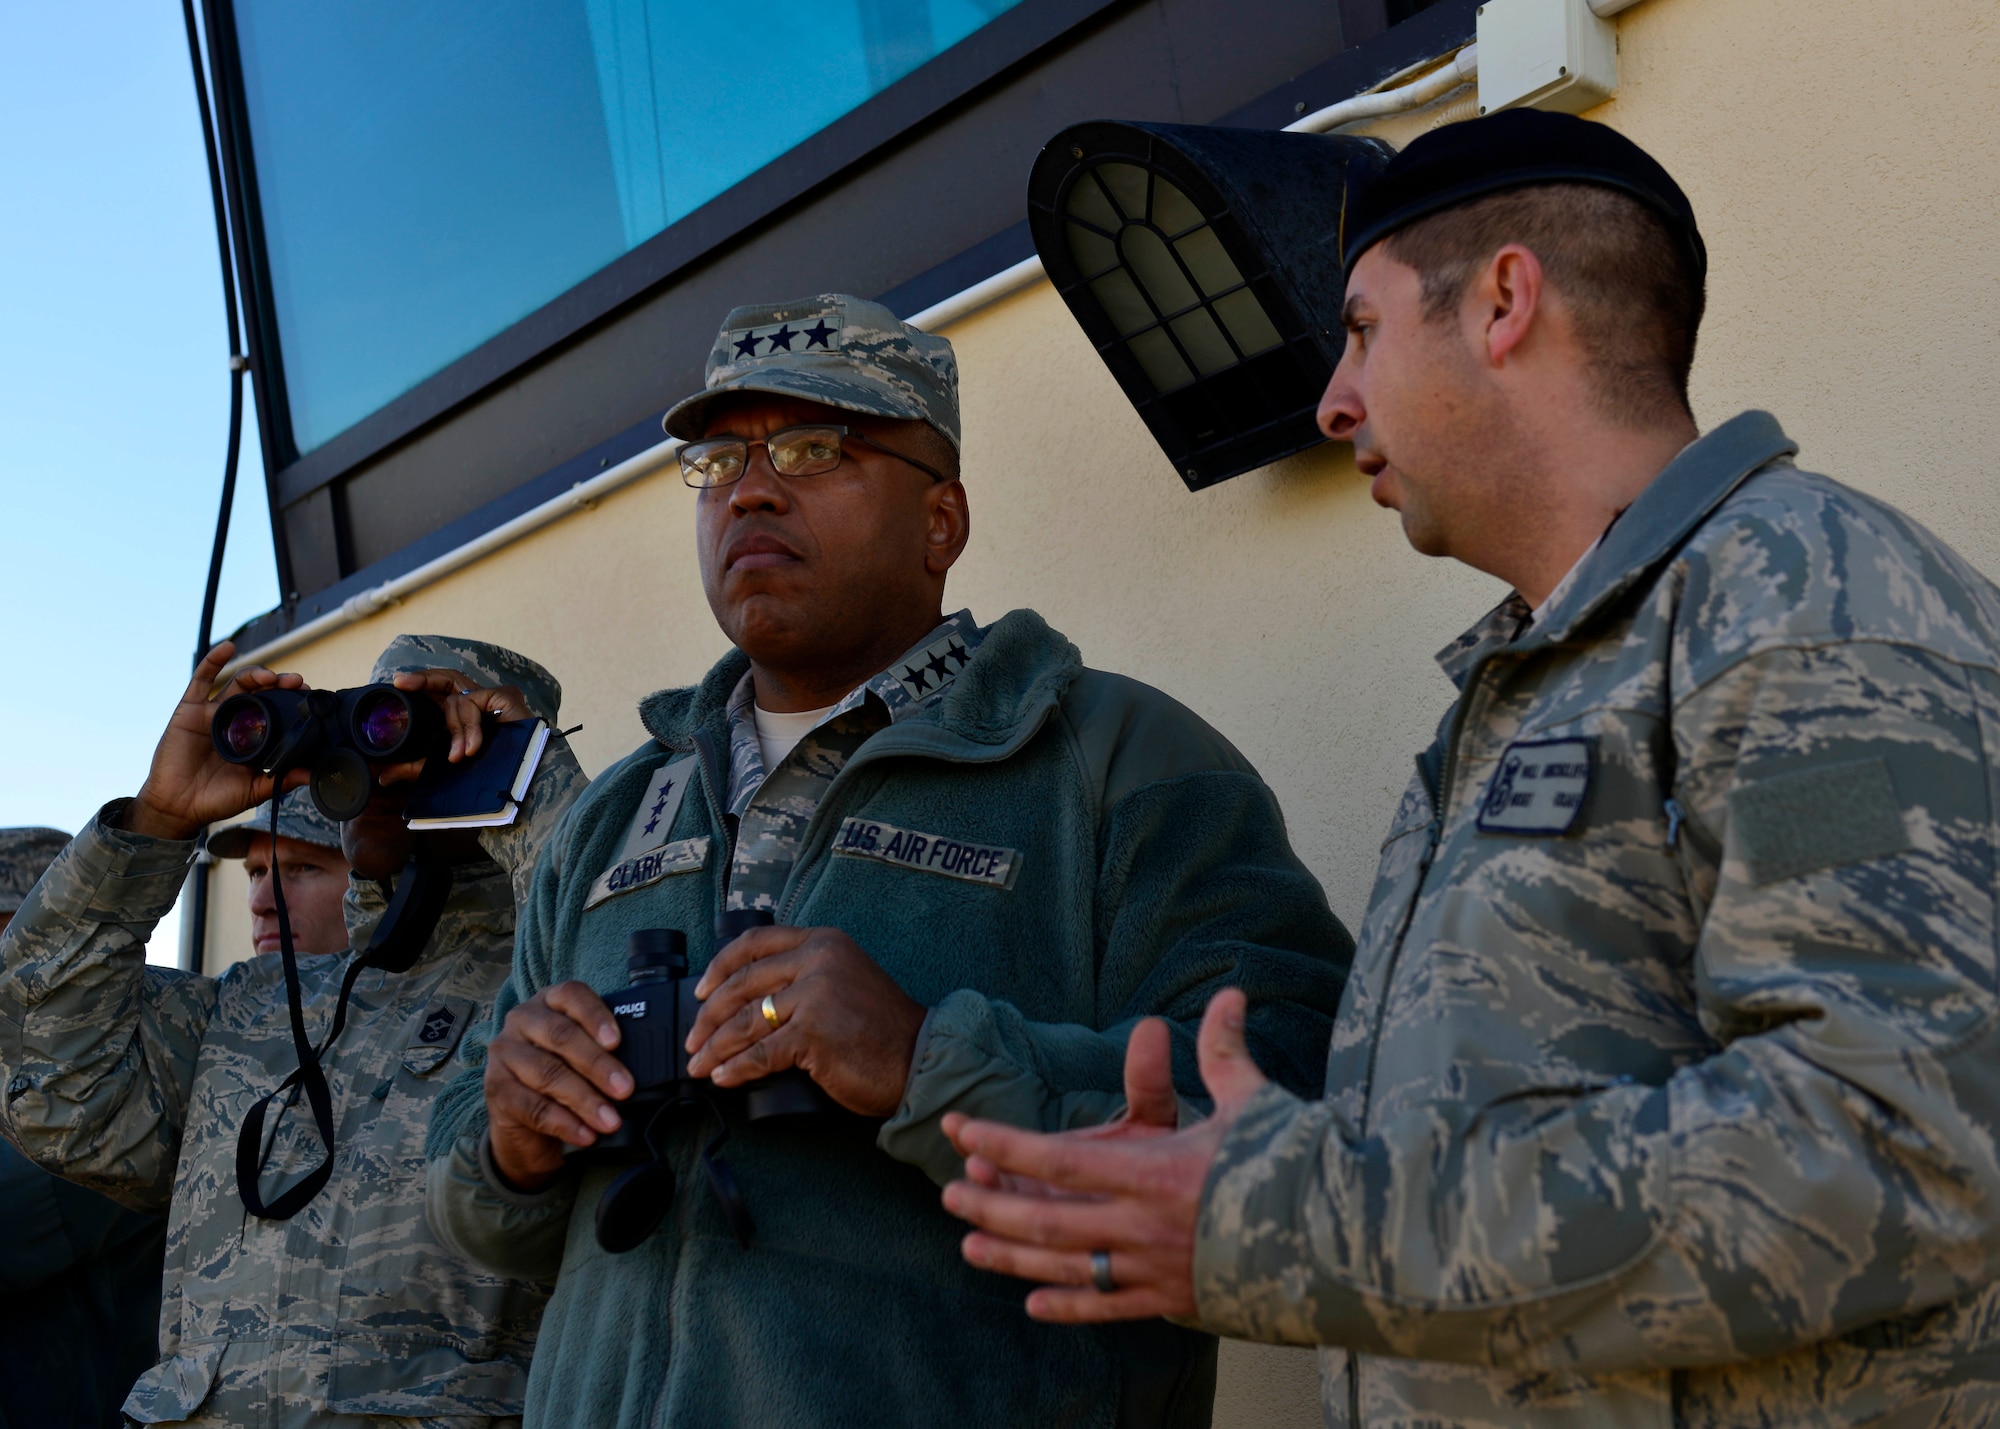 Master Sgt. William Hinchcliff, 31st Security Forces flight chief, talks to Lt. Gen. Richard Clark, 3rd Air Force commander, during a security forces demonstration at Aviano Air Base, Italy on Nov. 30, 2016. Clark toured the base, met with Airmen and hosted an all call to thank Team Aviano for their hard work and dedication to the mission. (U.S. Air Force photo by Senior Airman Cary Smith)